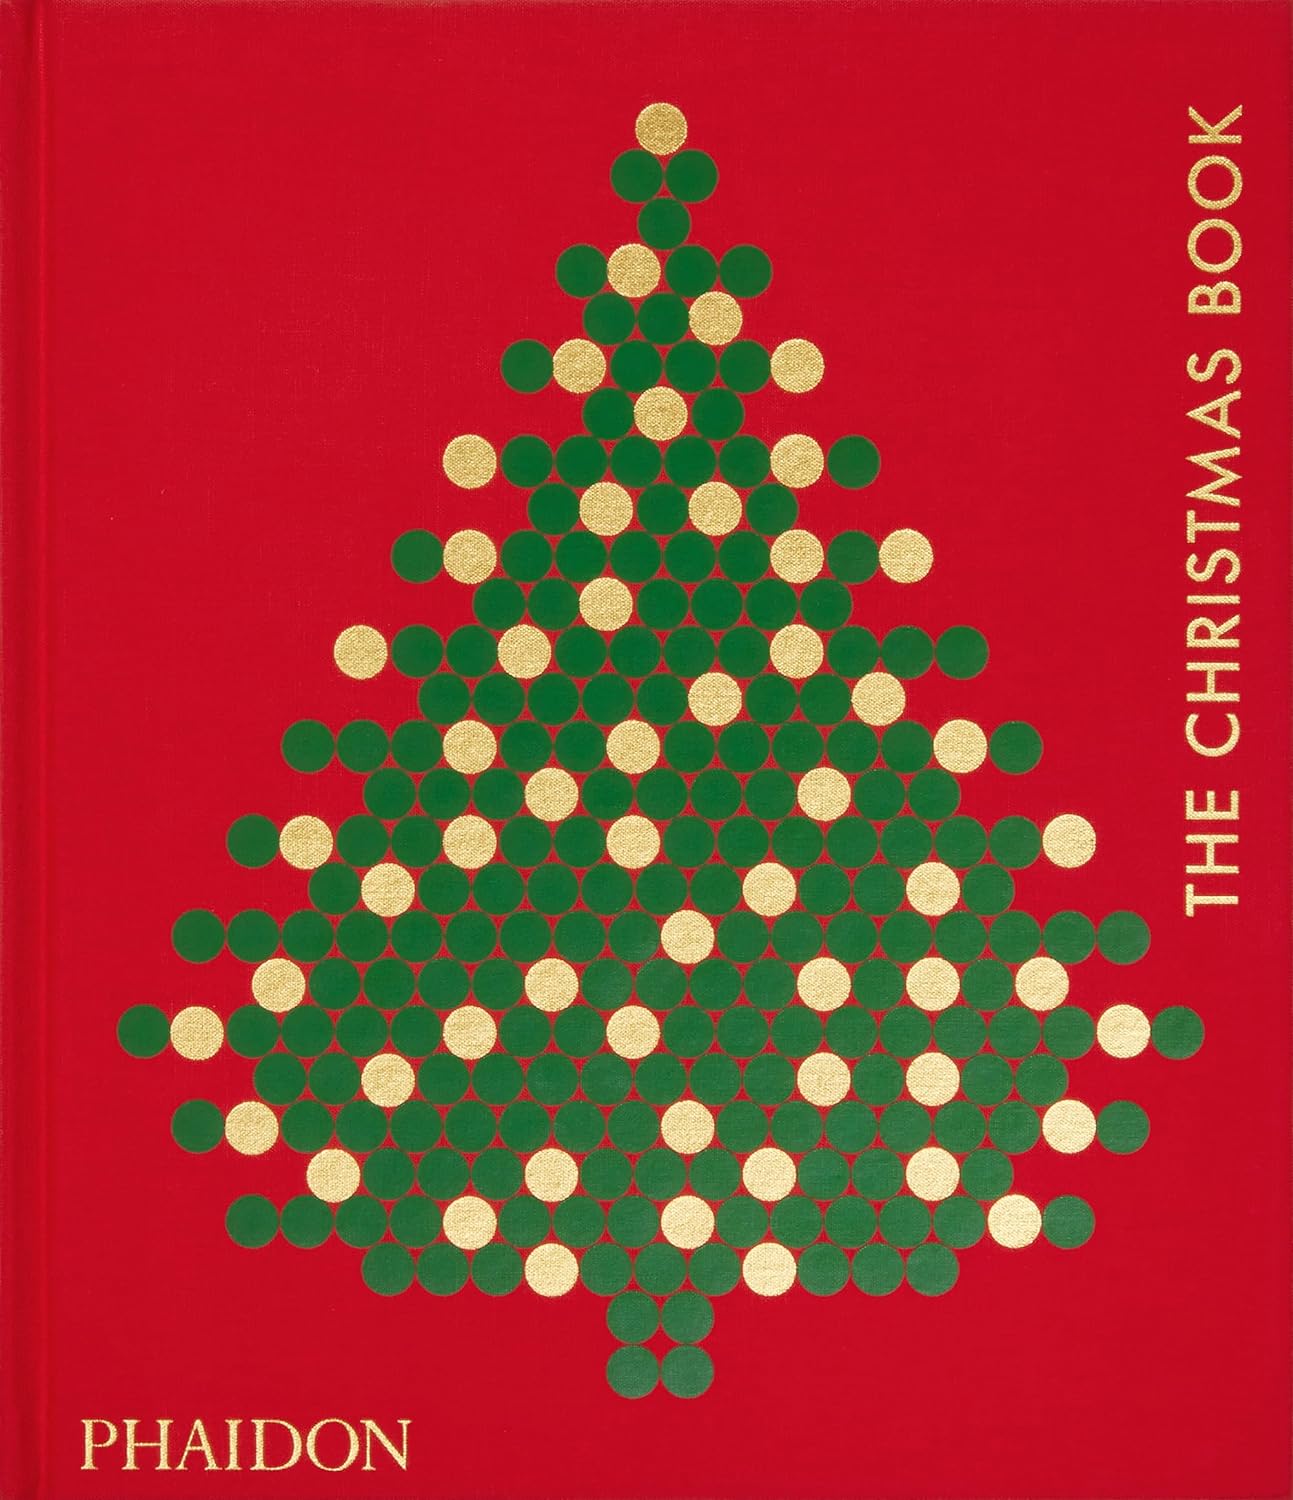 A red book cover depicting simple dotted artwork that resembles a Christmas tree covered with gold baubles.